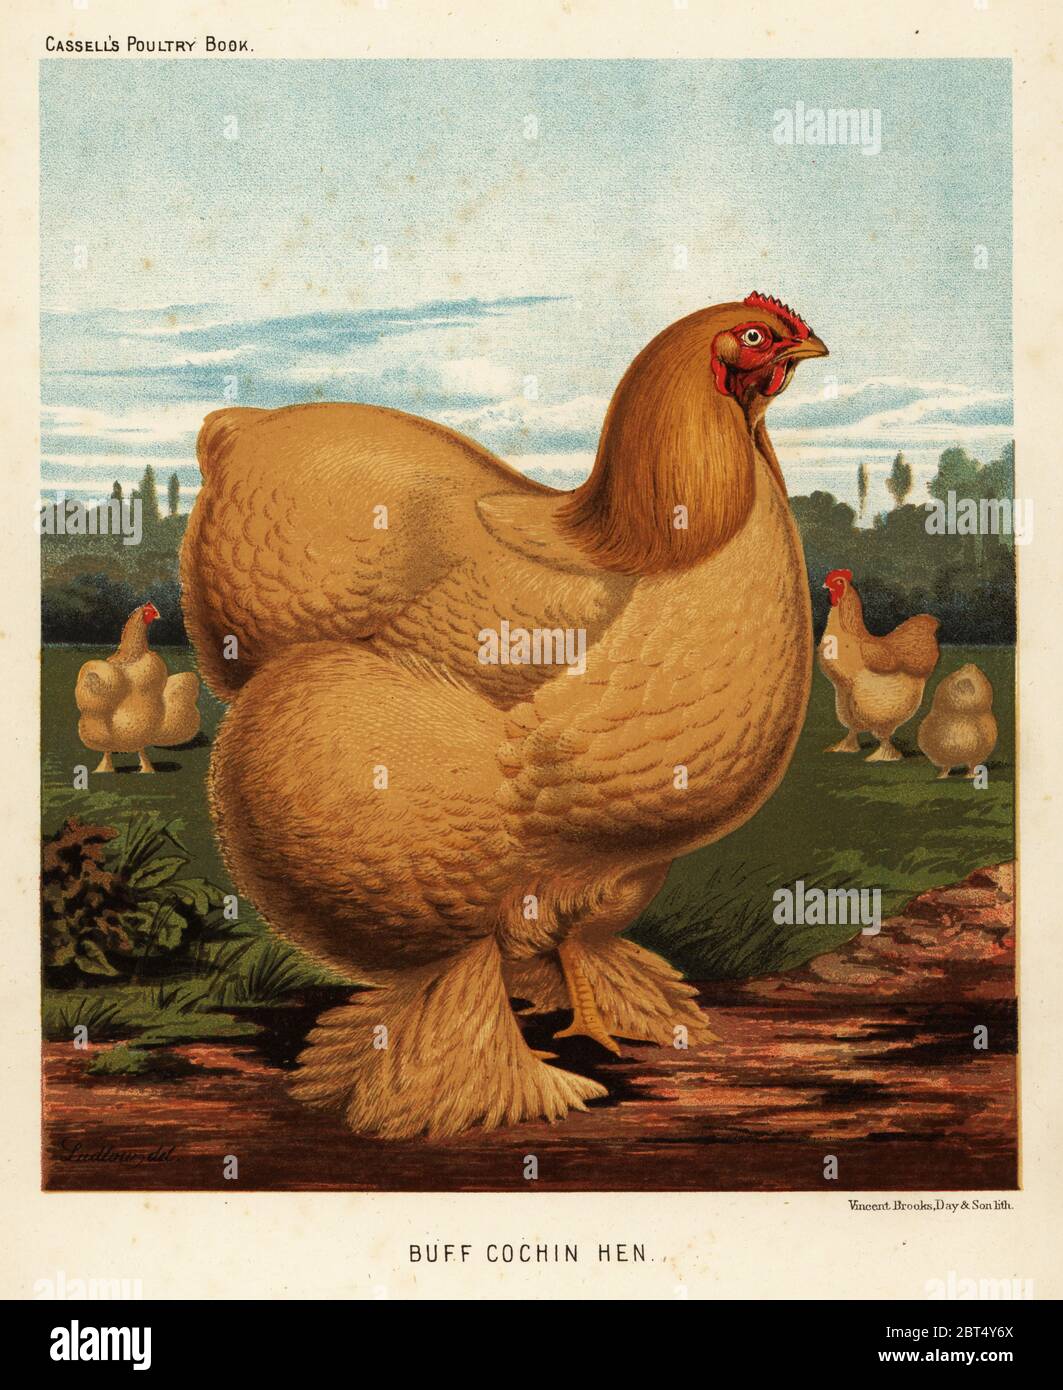 Buff cochin hen, Gallus gallus domesticus. Chromolithograph by Vincent Brooks Day & Son after an illustration by J.W. Ludlow from Lewis Wrights The Illustrated Book of Poultry, Cassell, London, 1890. Stock Photo